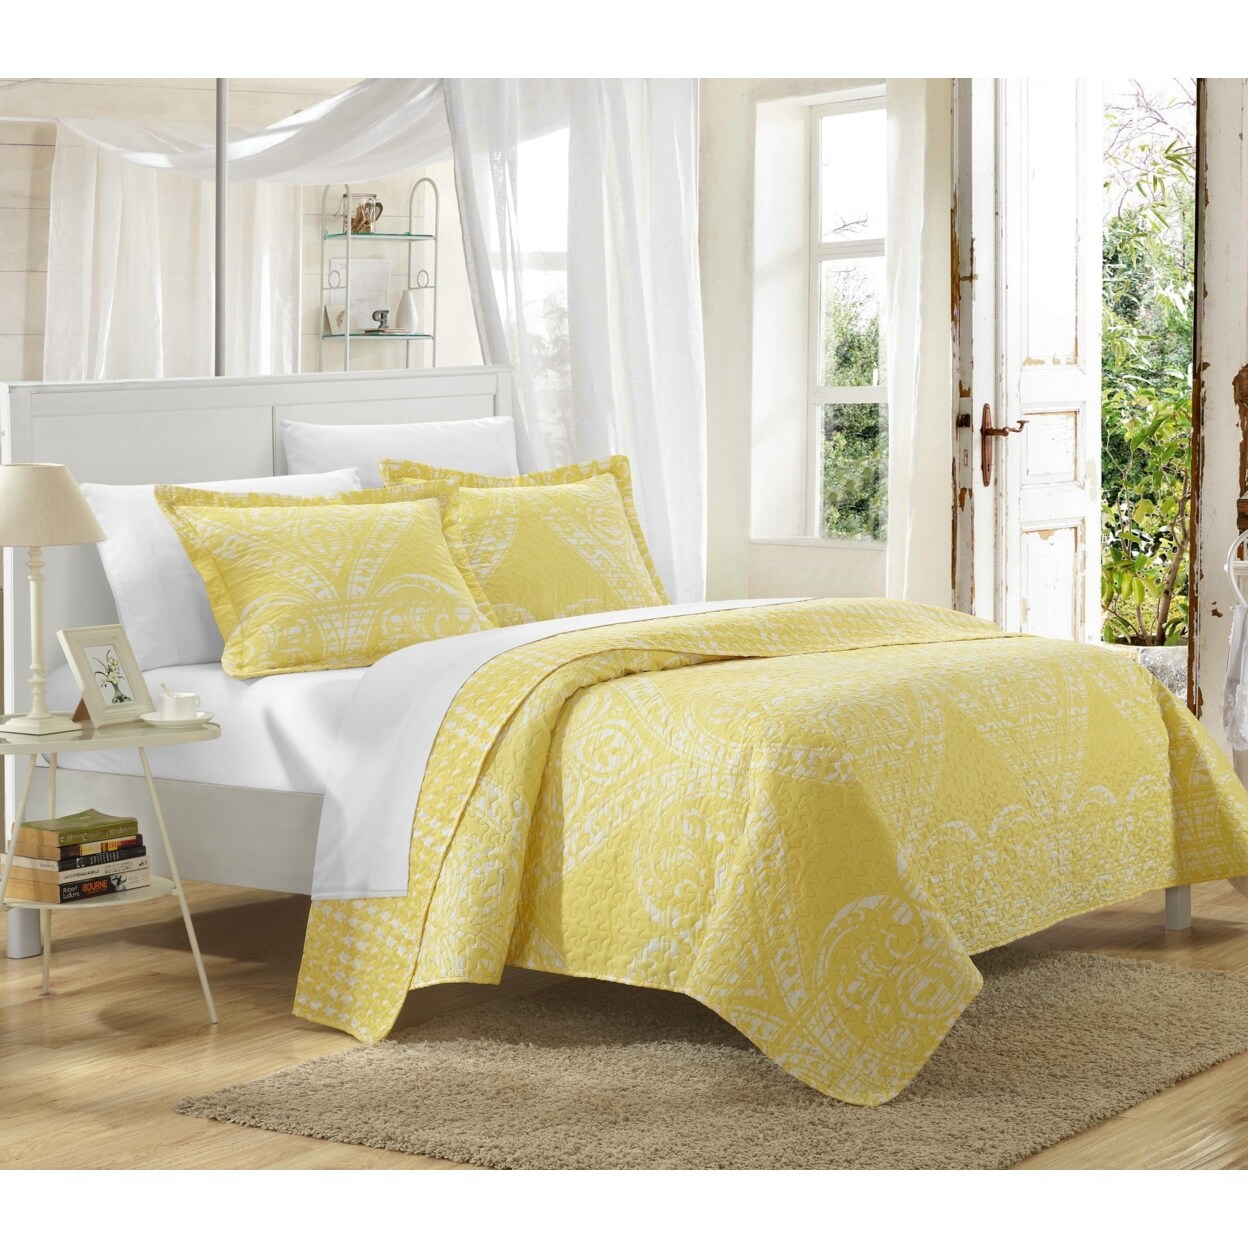 Chic Home 3 or 2 Piece Revenna REVERSIBLE printed Quilt Set. Front a traditional pattern and Reverses into a houndstooth pattern